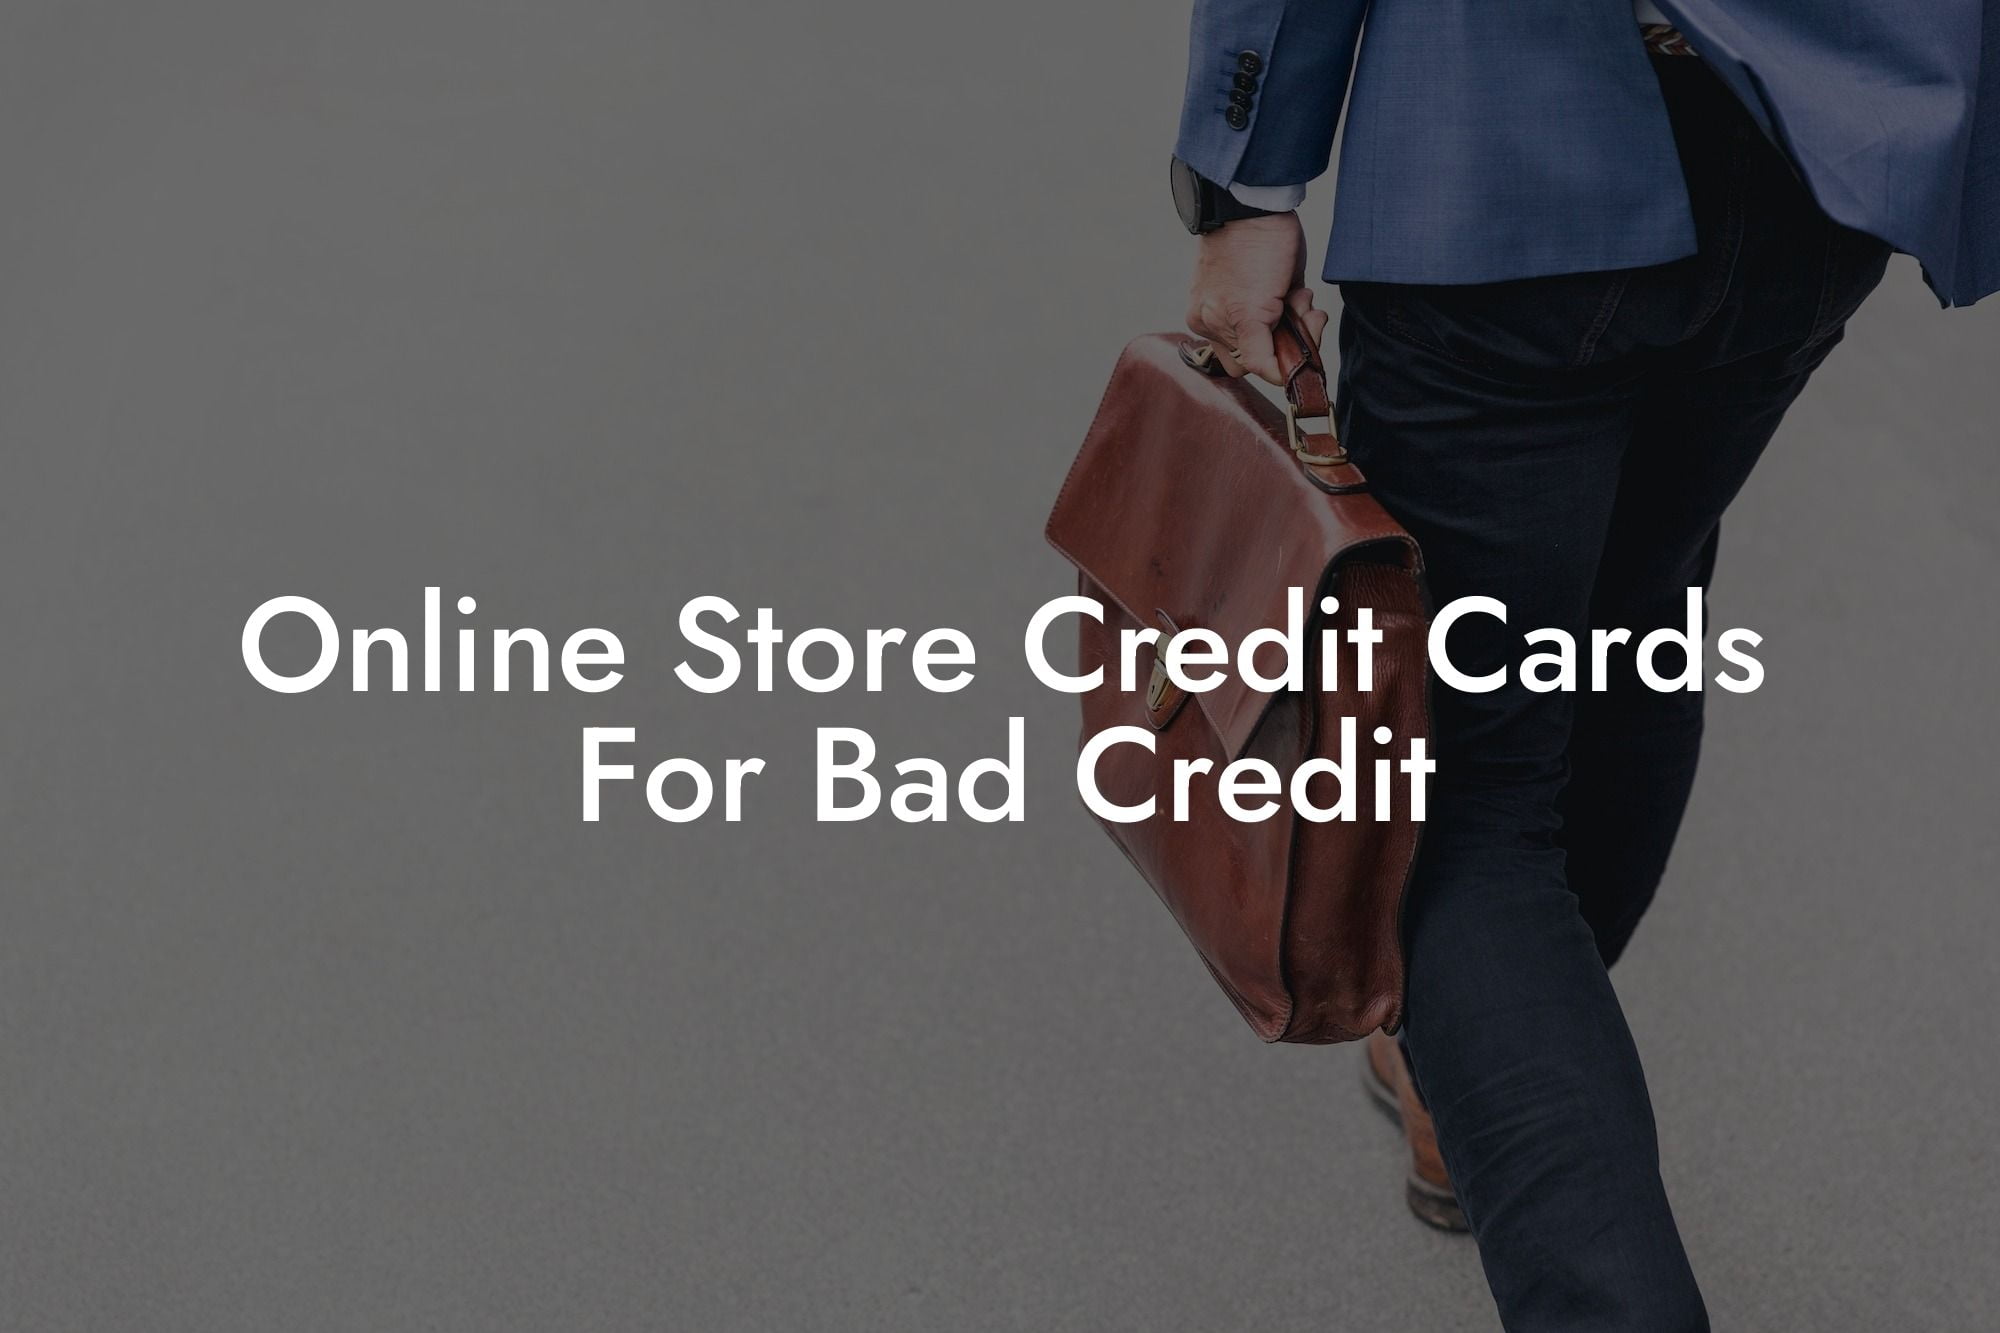 Online Store Credit Cards For Bad Credit